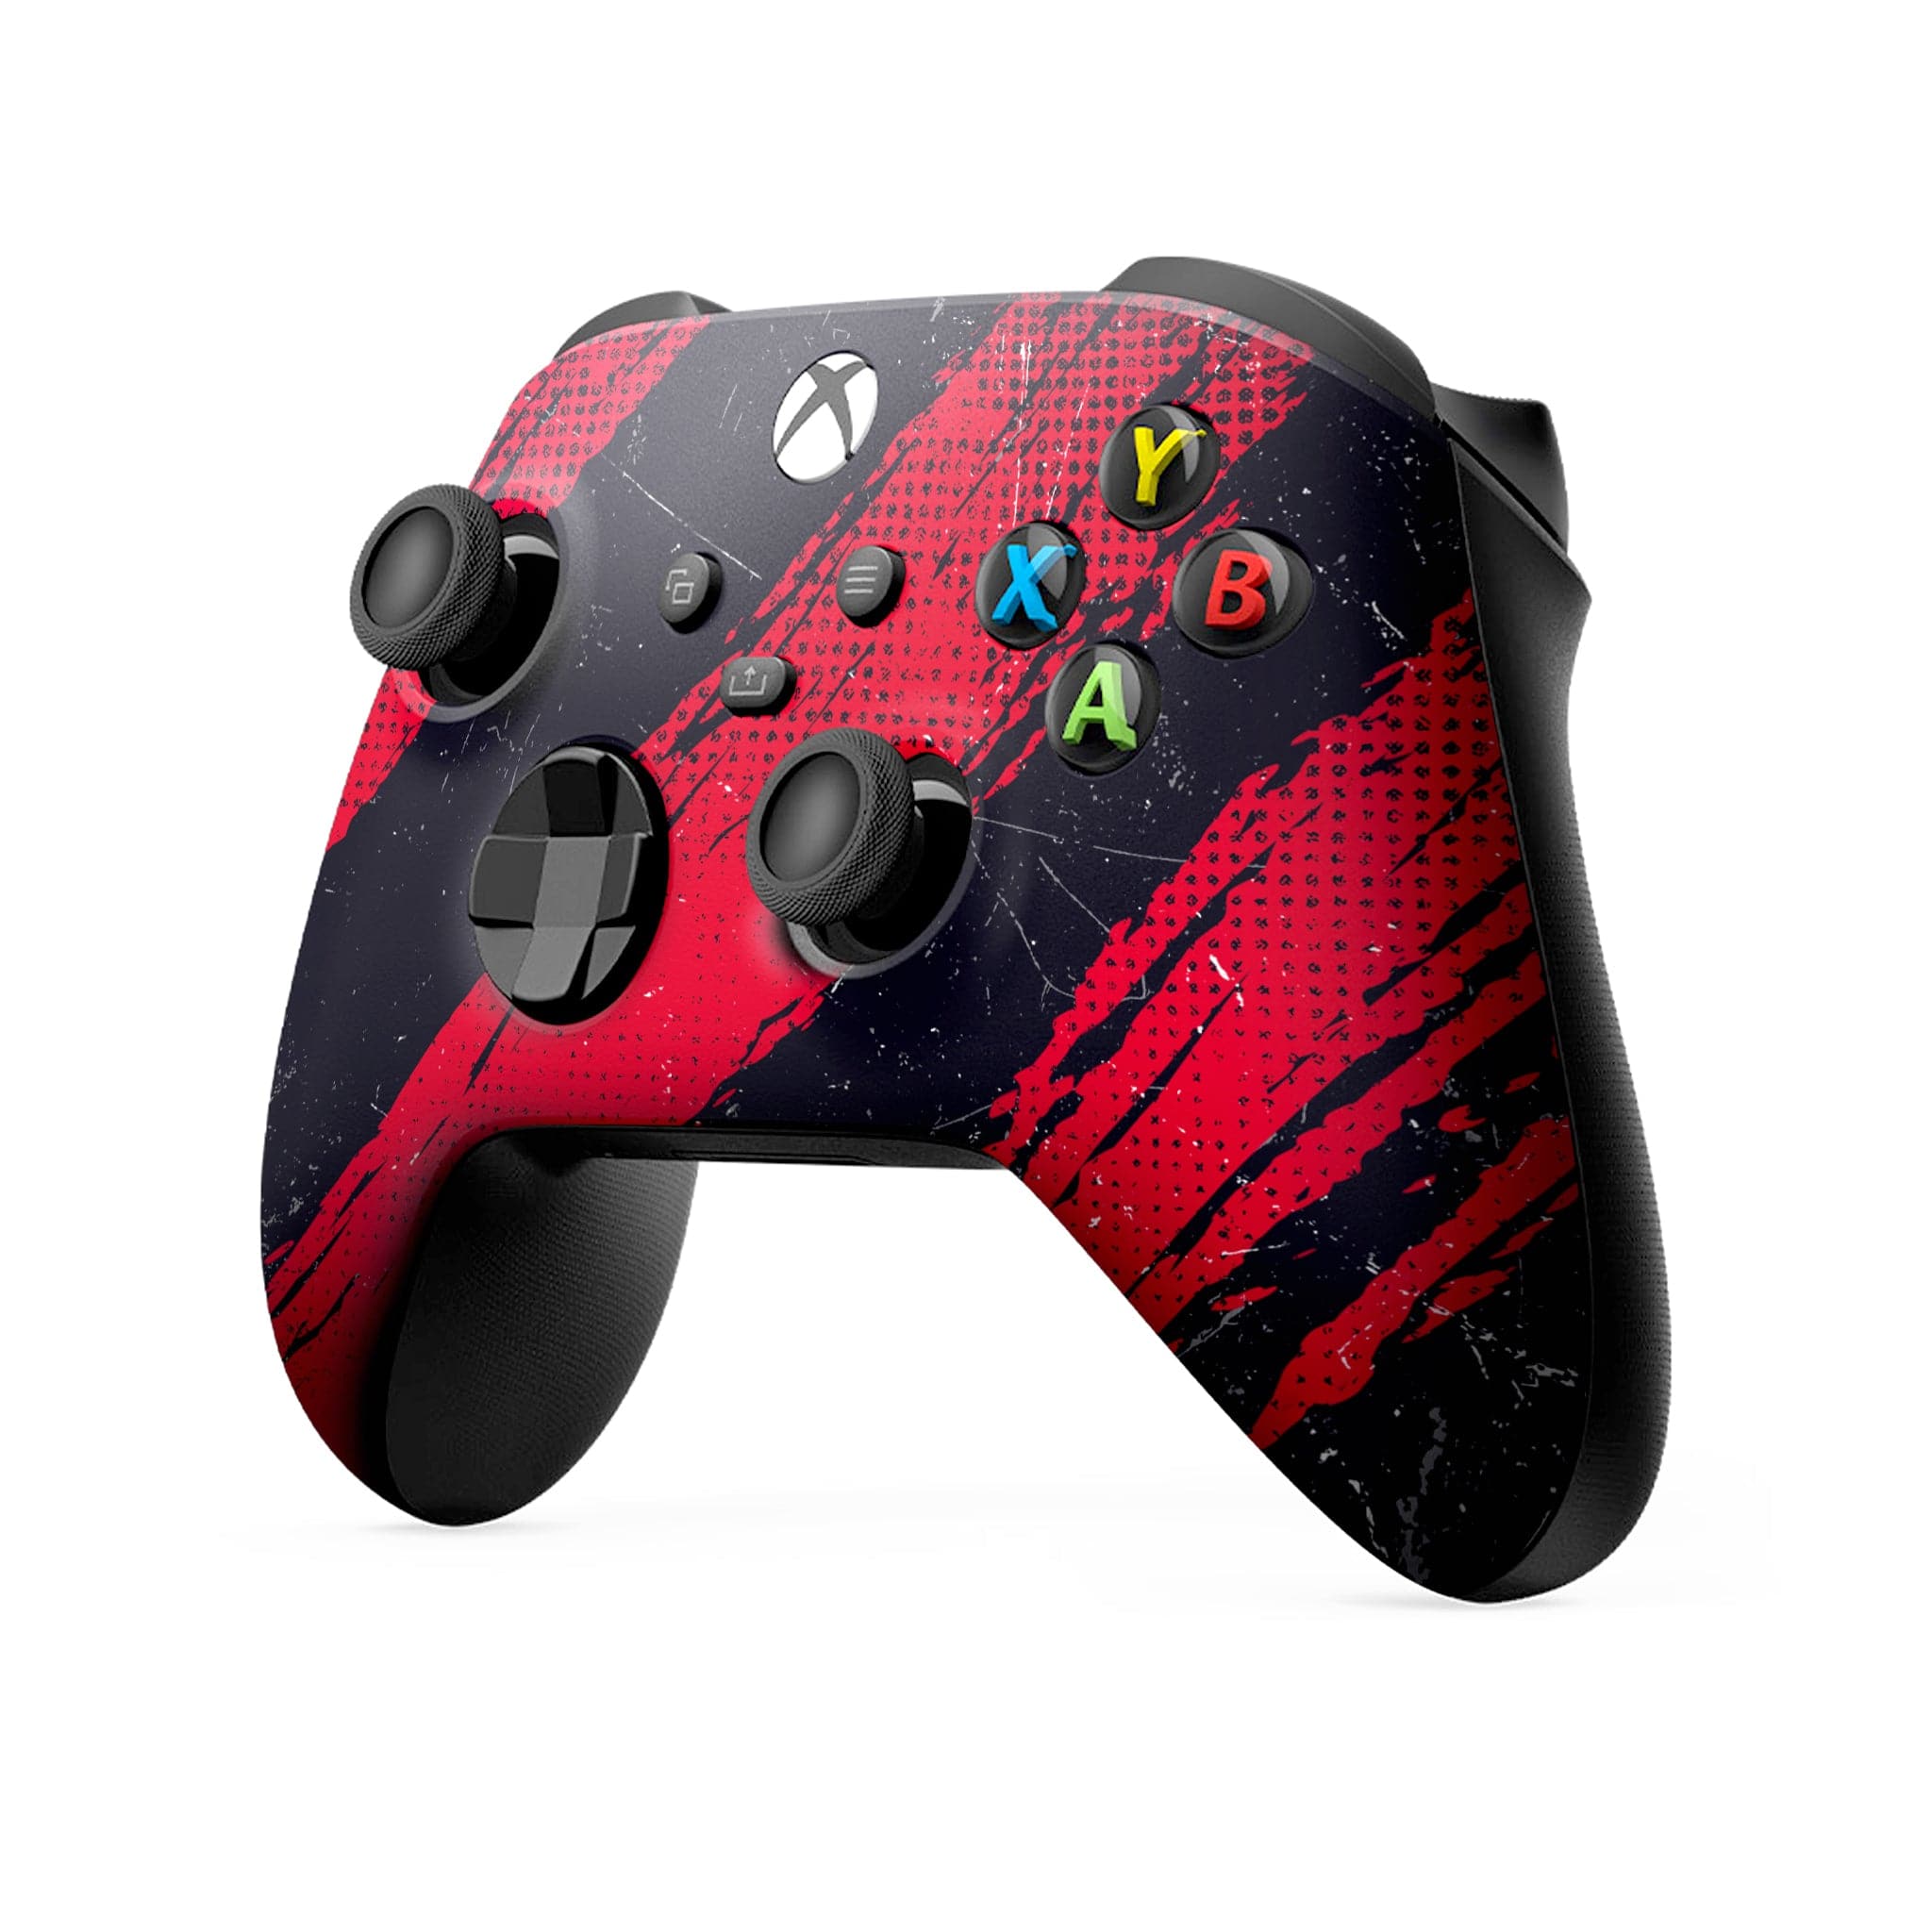 Ripper red xbox series x controller